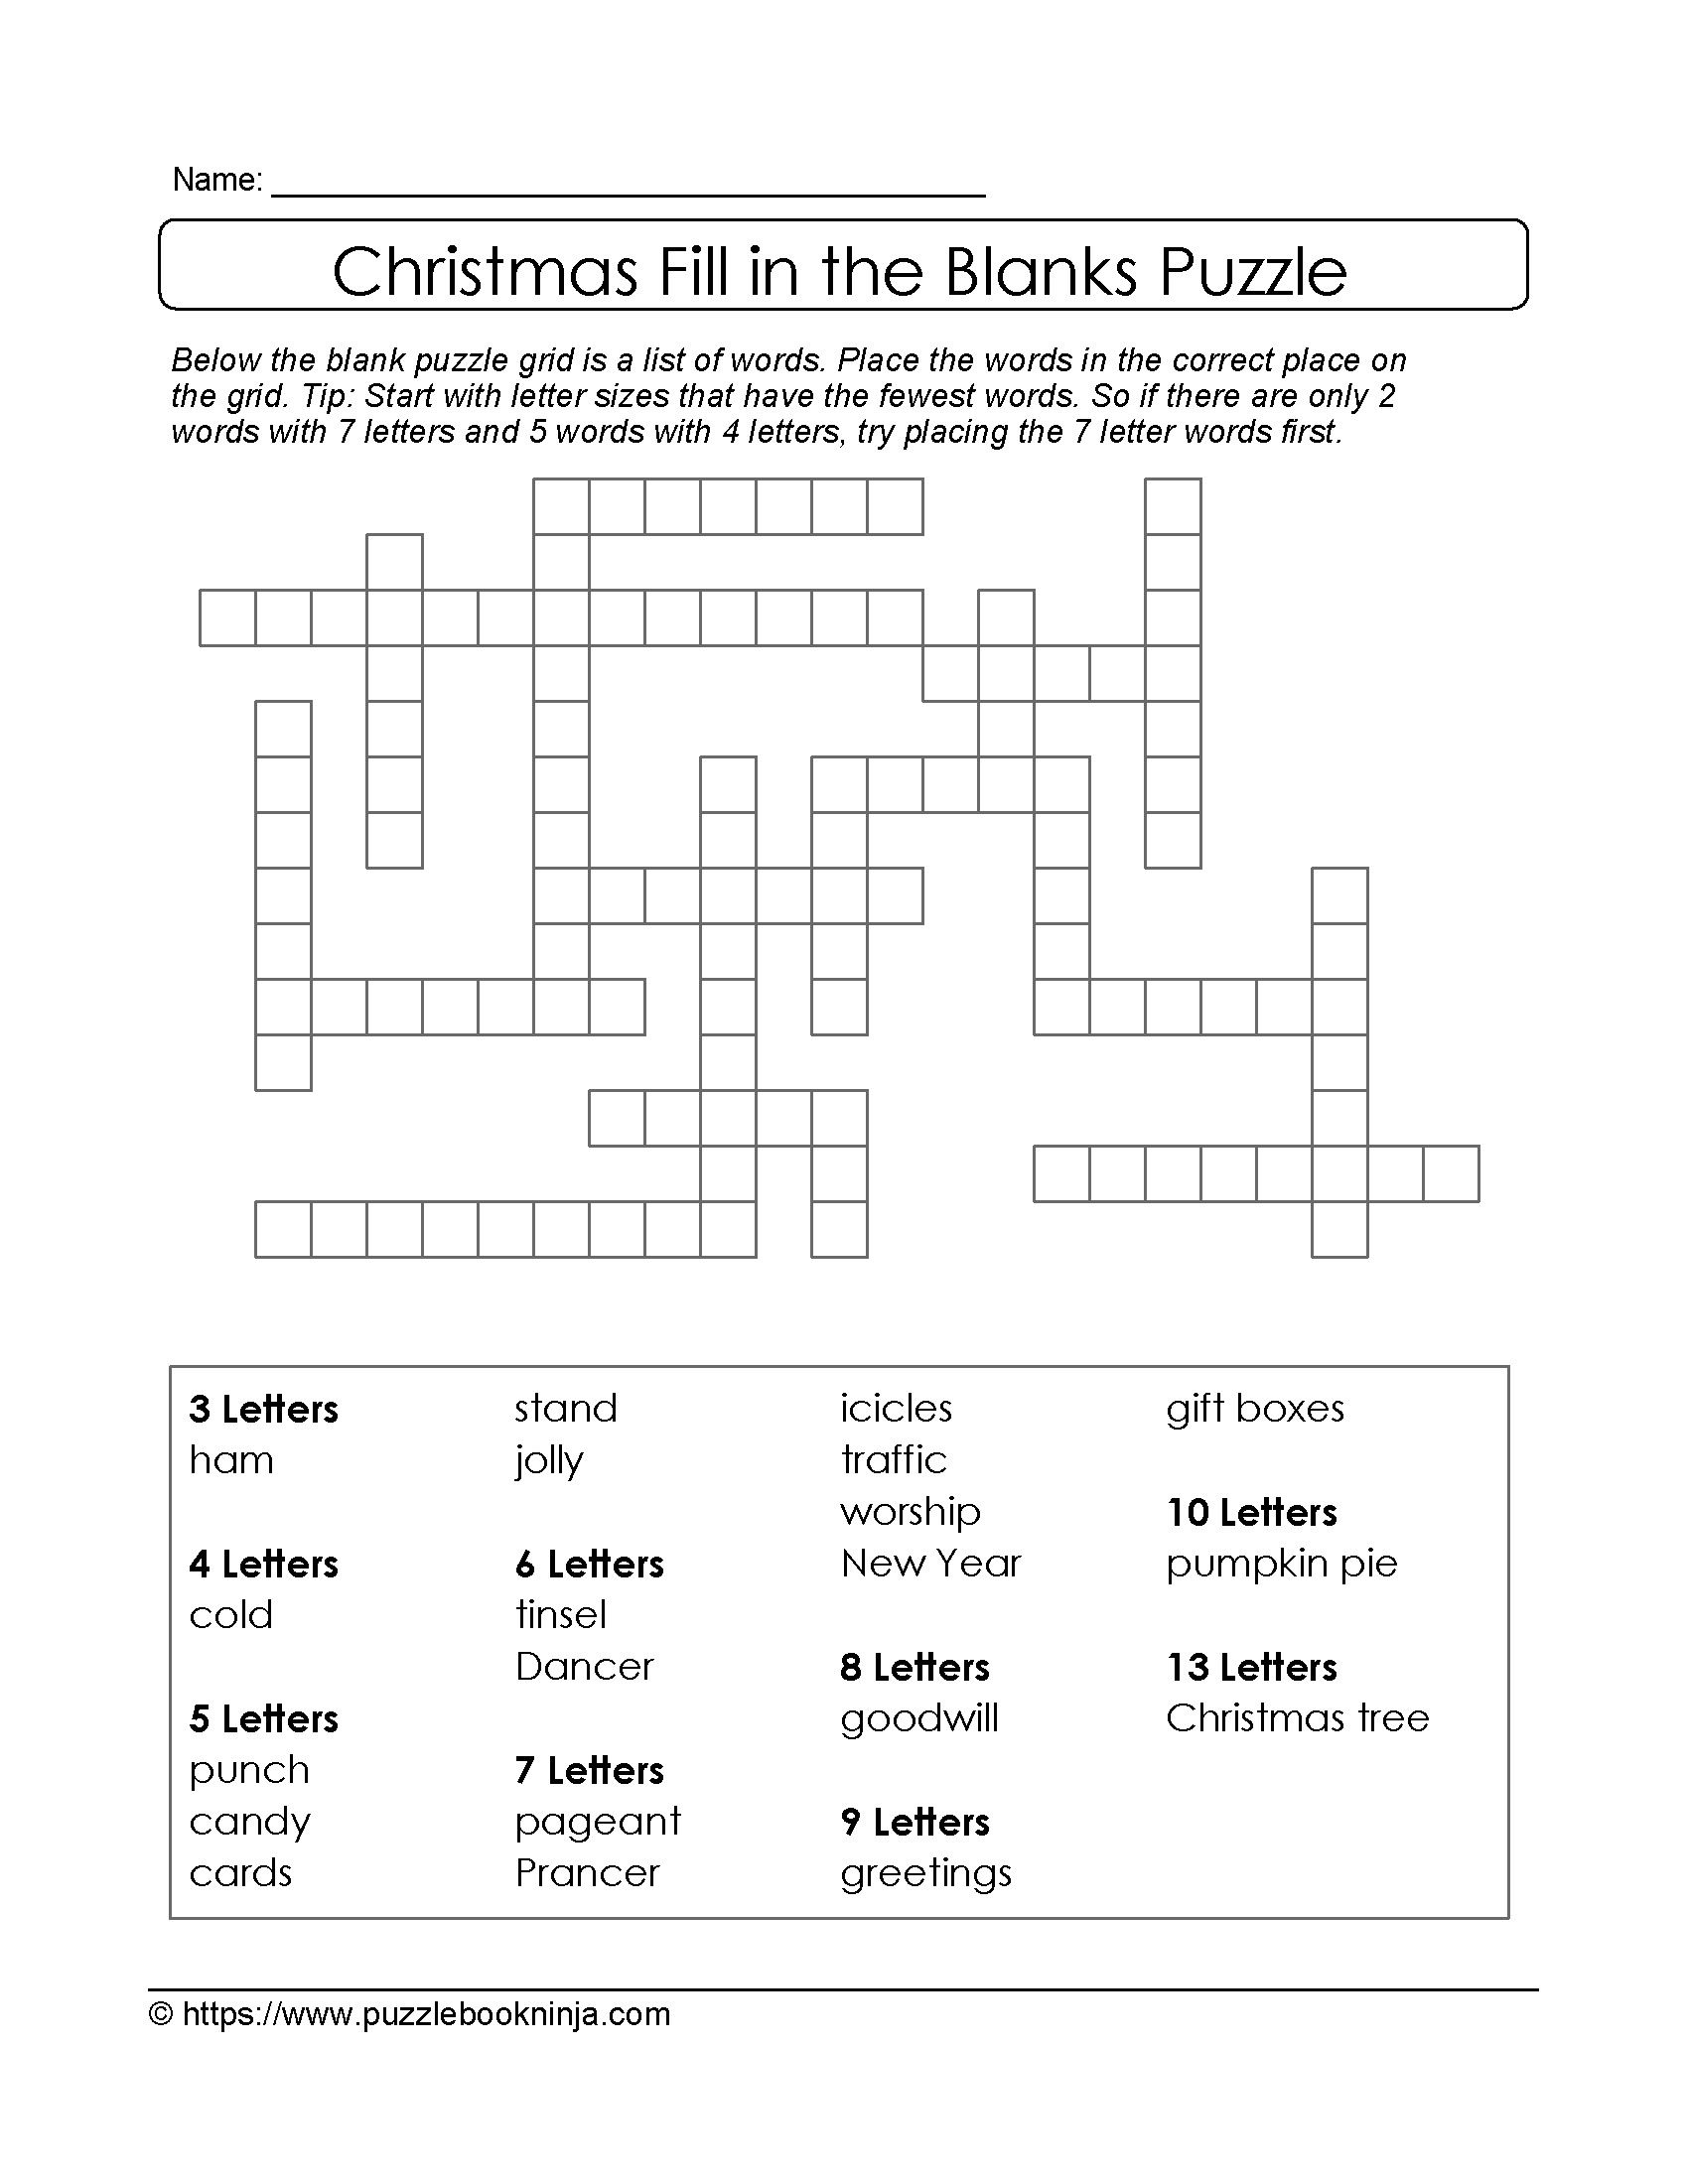 Freebie Xmas Puzzle To Print. Fill In The Blanks Crossword Like - Blank Crossword Puzzle Printable